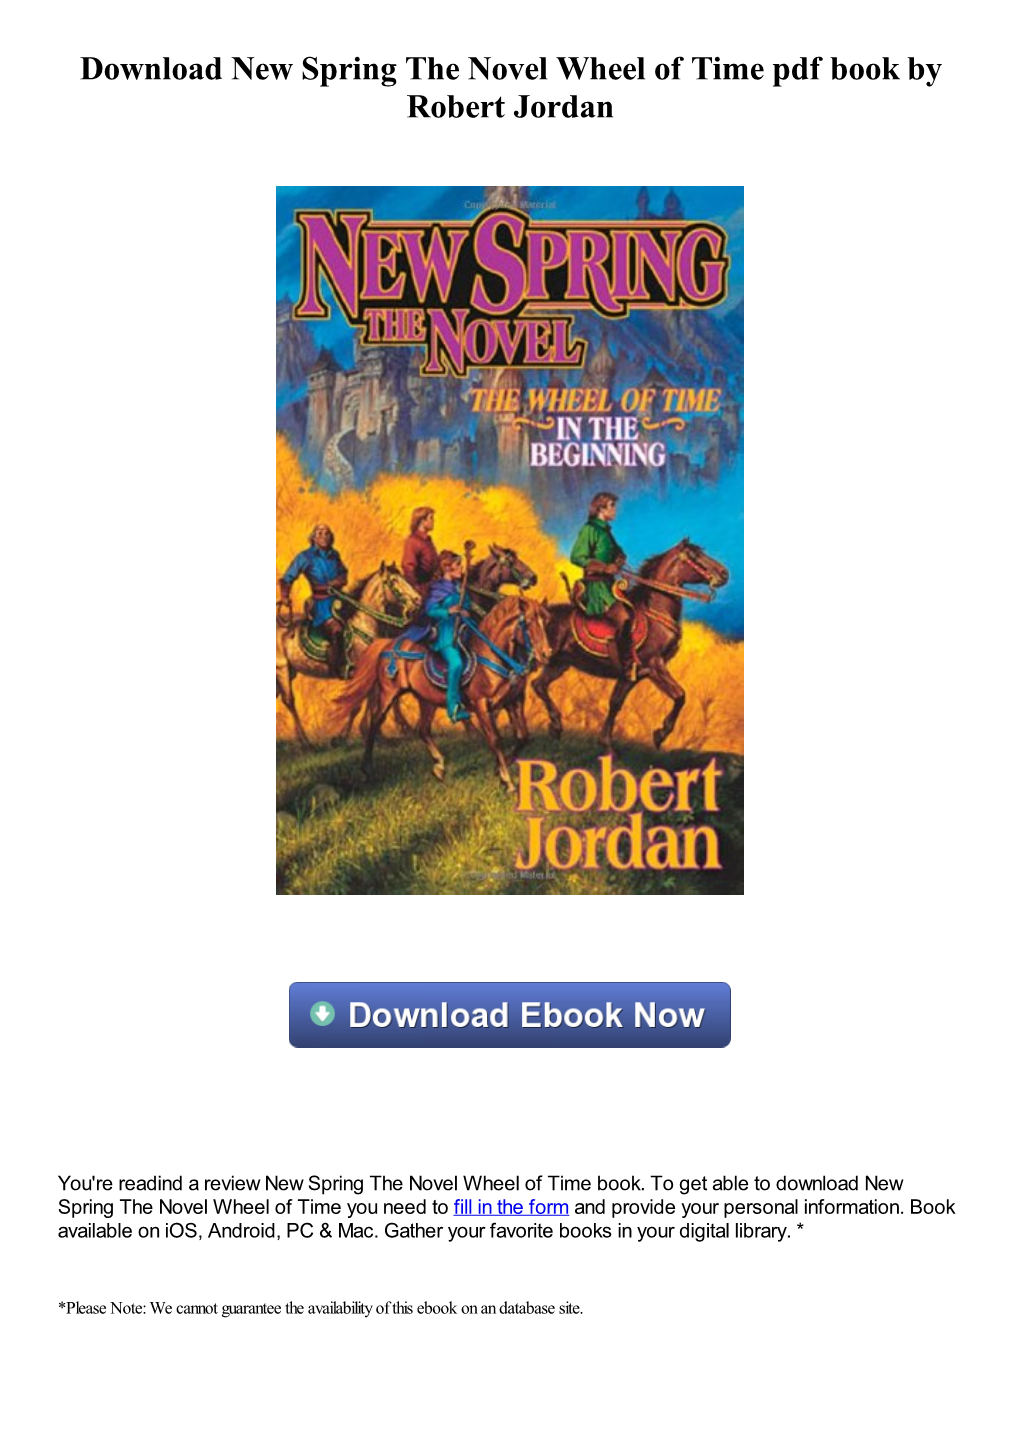 Download New Spring the Novel Wheel of Time Pdf Ebook by Robert